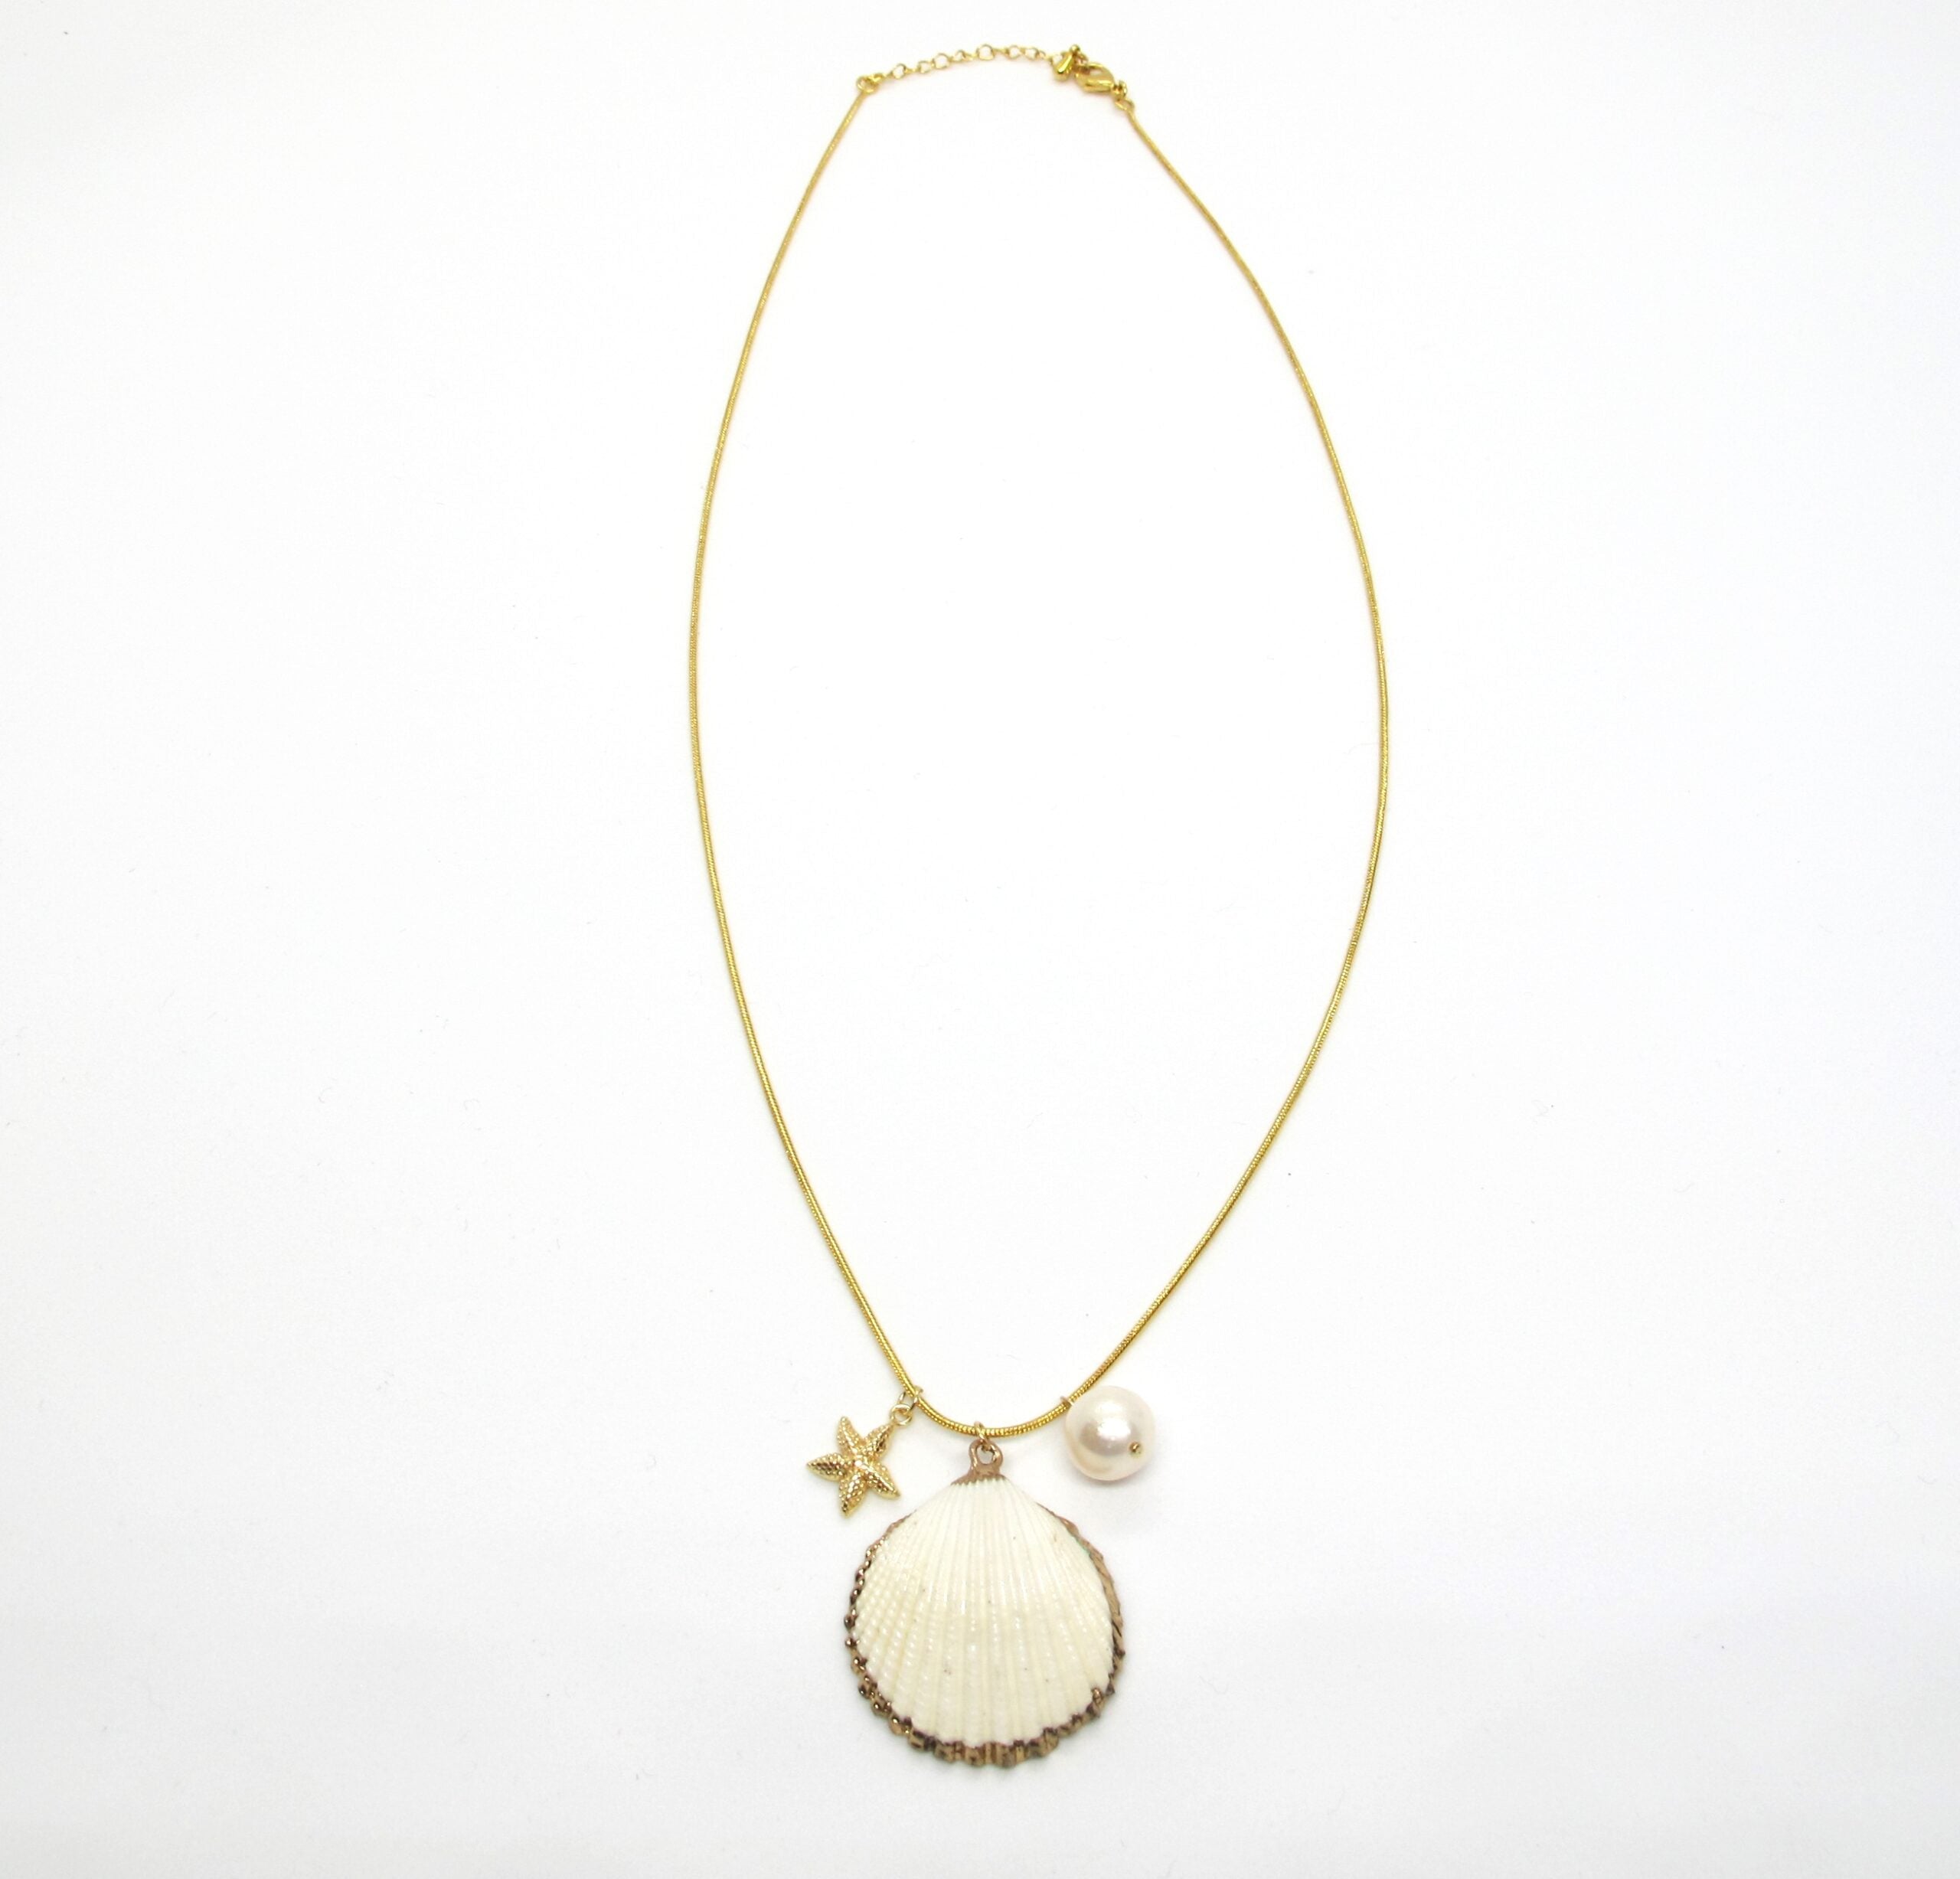 Shell necklace with pearl – Maui